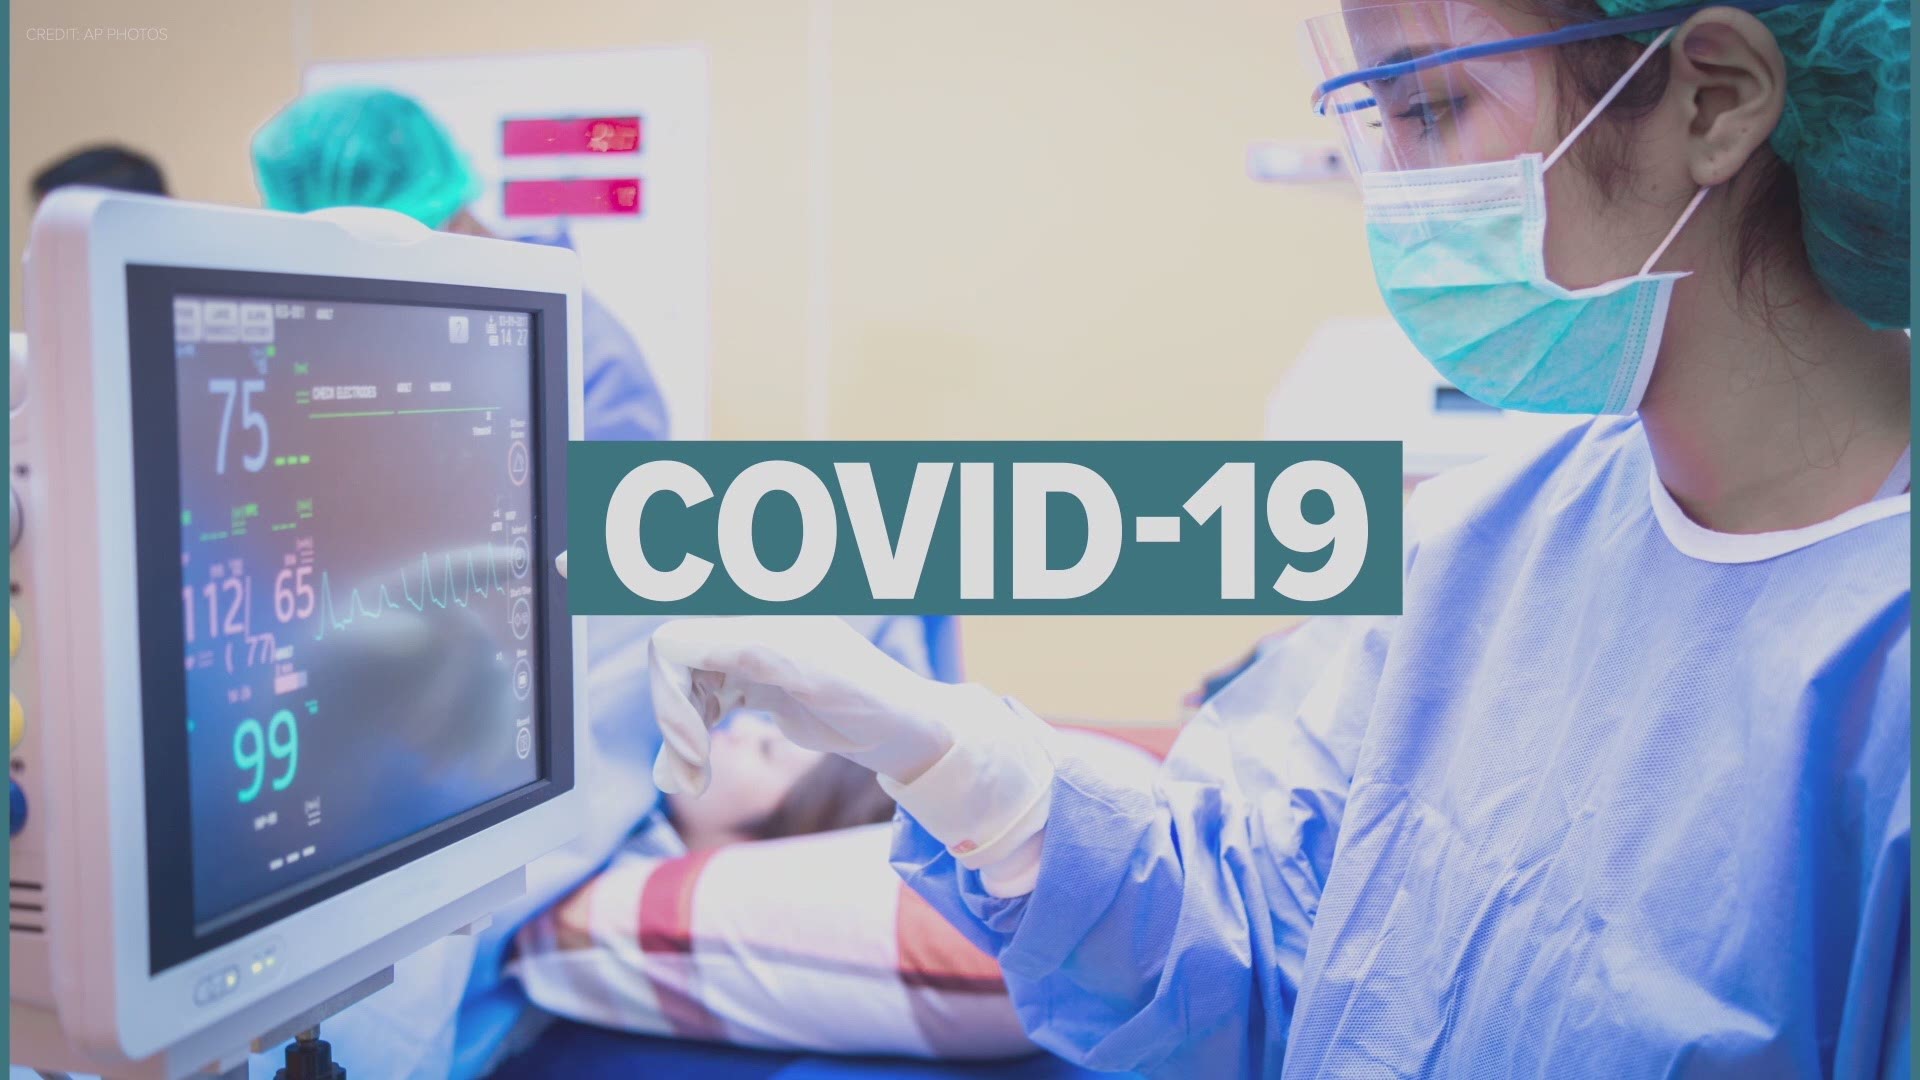 The number of coronavirus cases in Arizona has reached 11,380 as of Monday, with 542 coronavirus-related deaths. Here's the latest COVID-19 update.